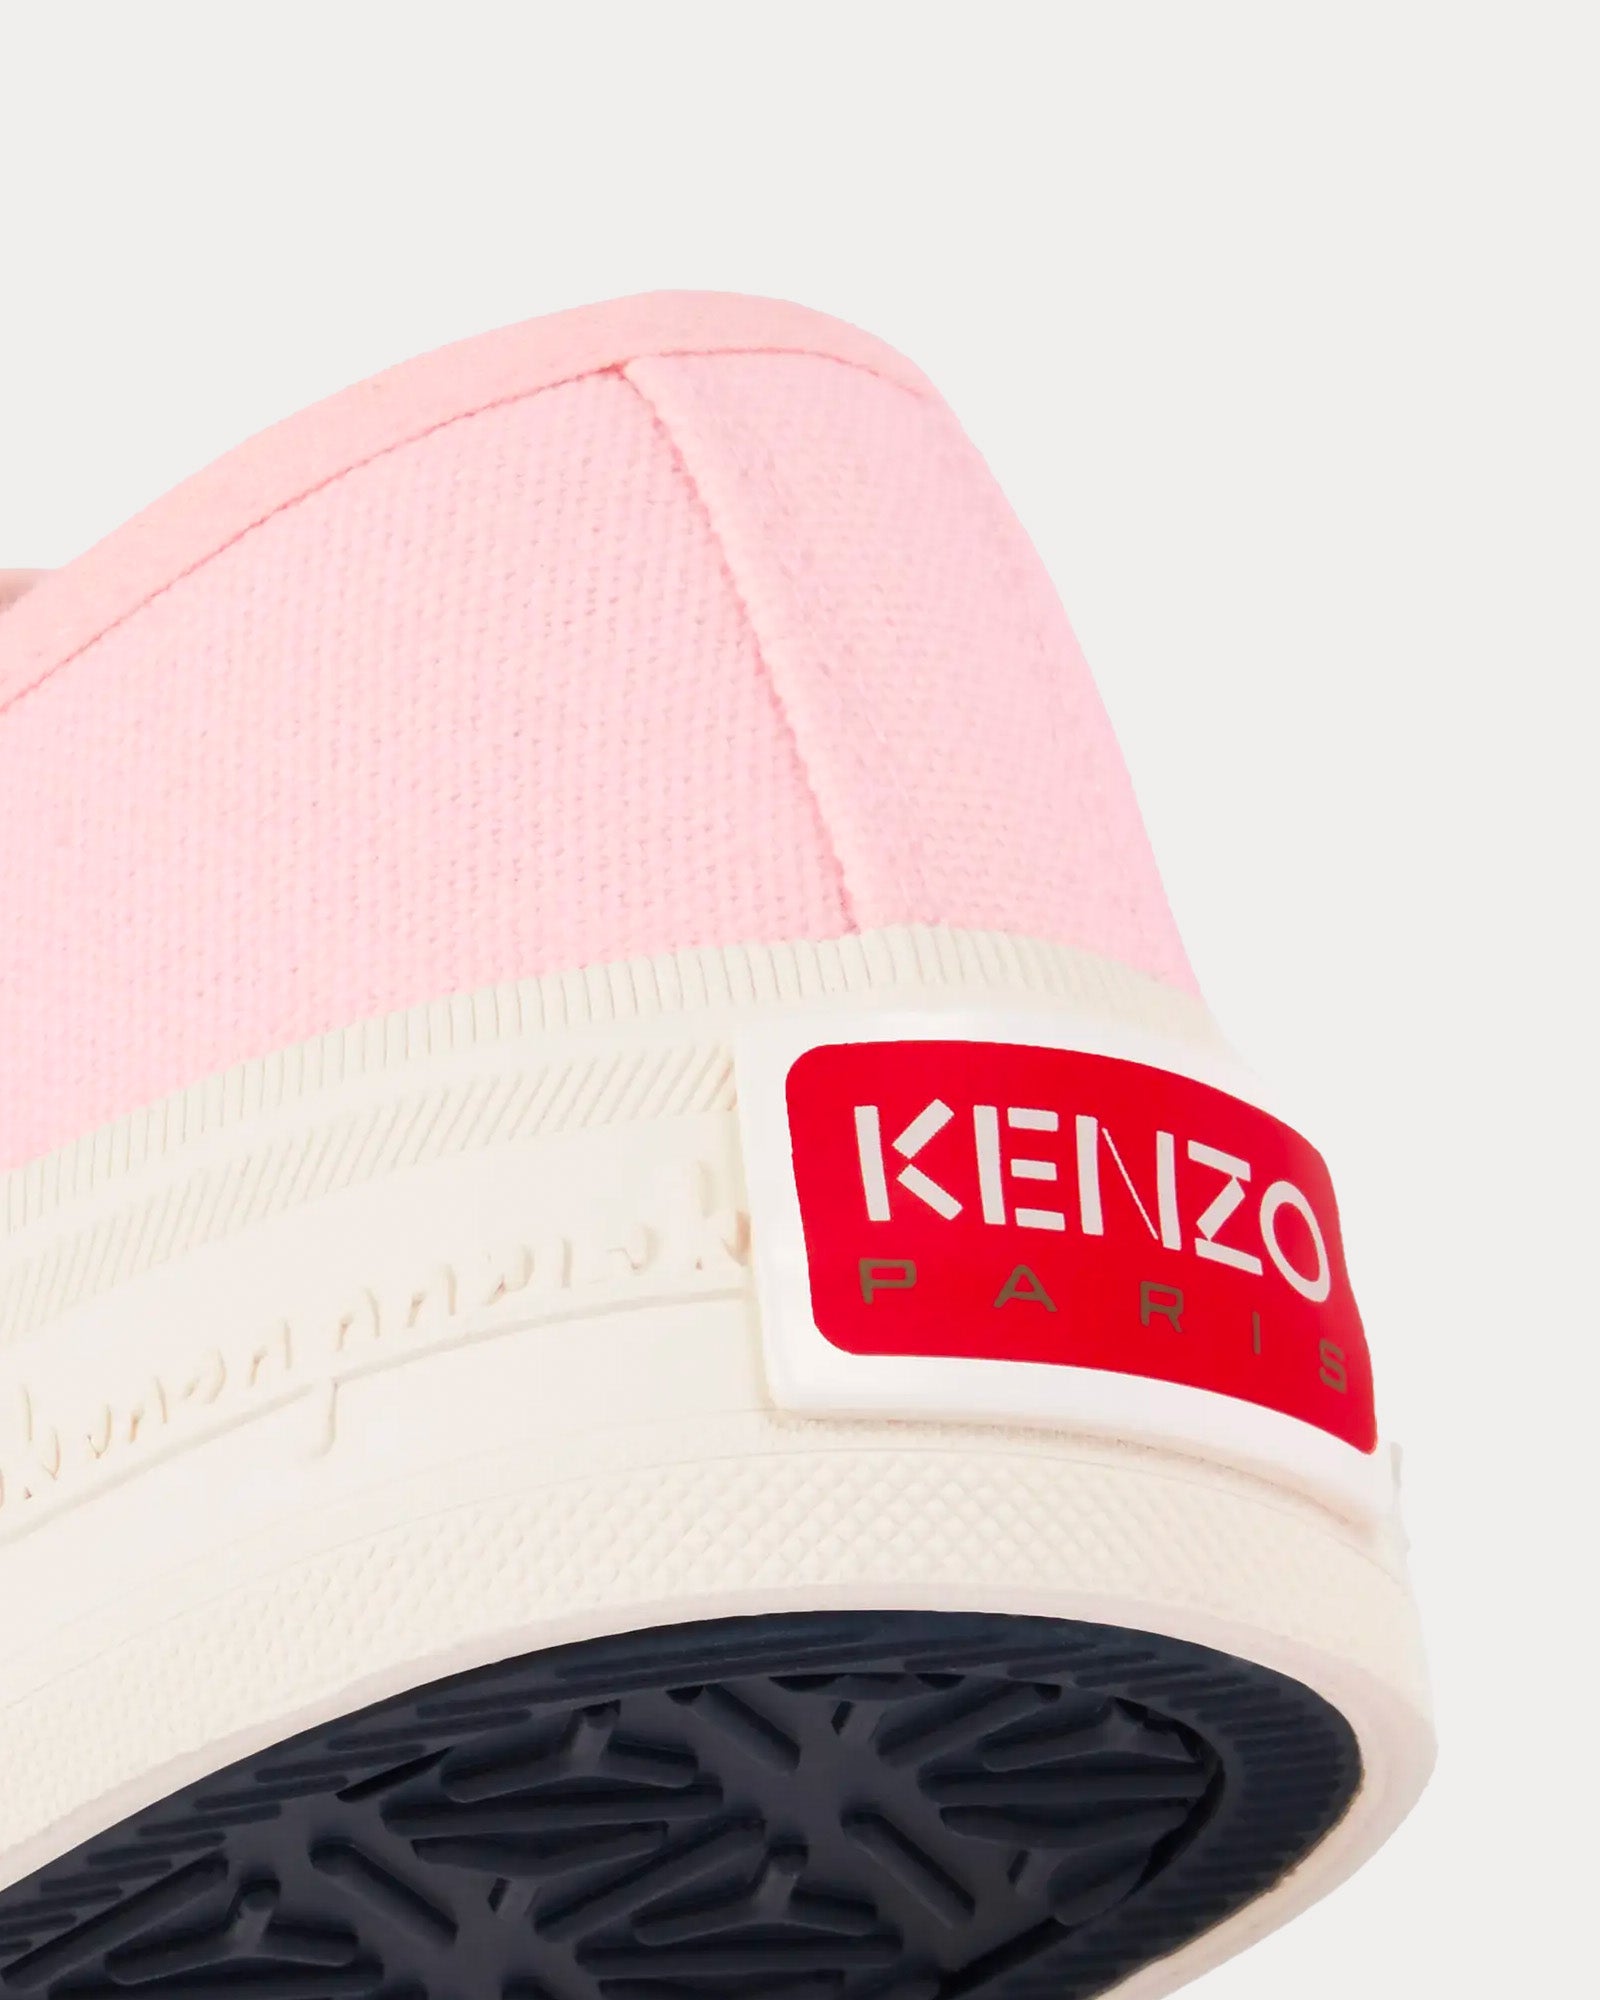 Kenzo - Kenzo Foxy Canvas Faded Pink Low Top Sneakers